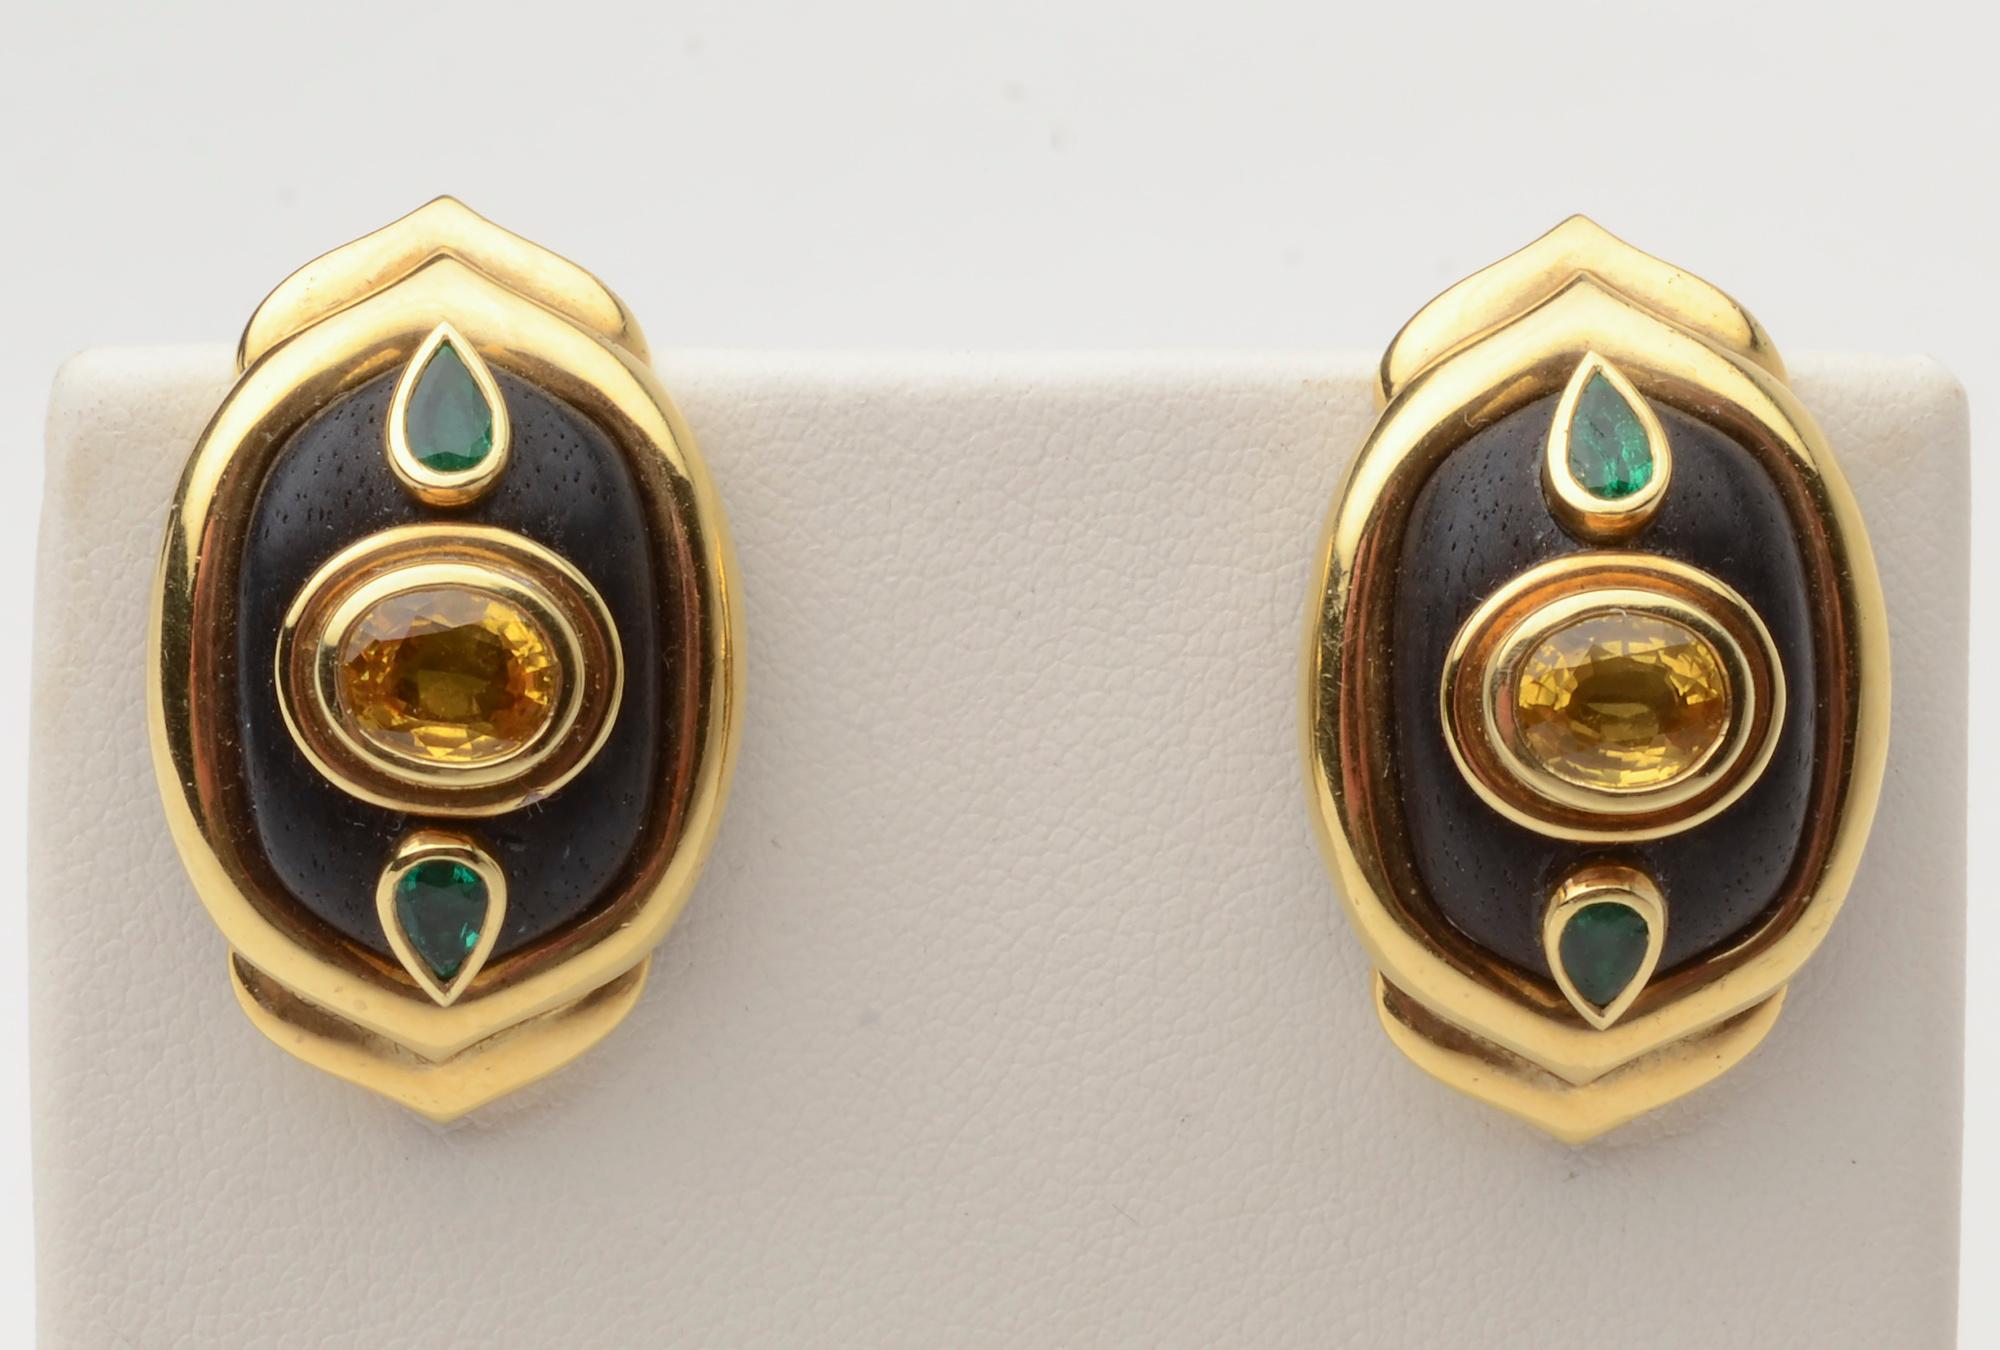 Sporty and unusual earrings by Boris Le Beau who sold jewelry from his shop on Madison Avenue for 40 years. A central yellow sapphire has pear shaped emeralds above and below. All are set in 18 karat gold on ebony.
Omega backs.